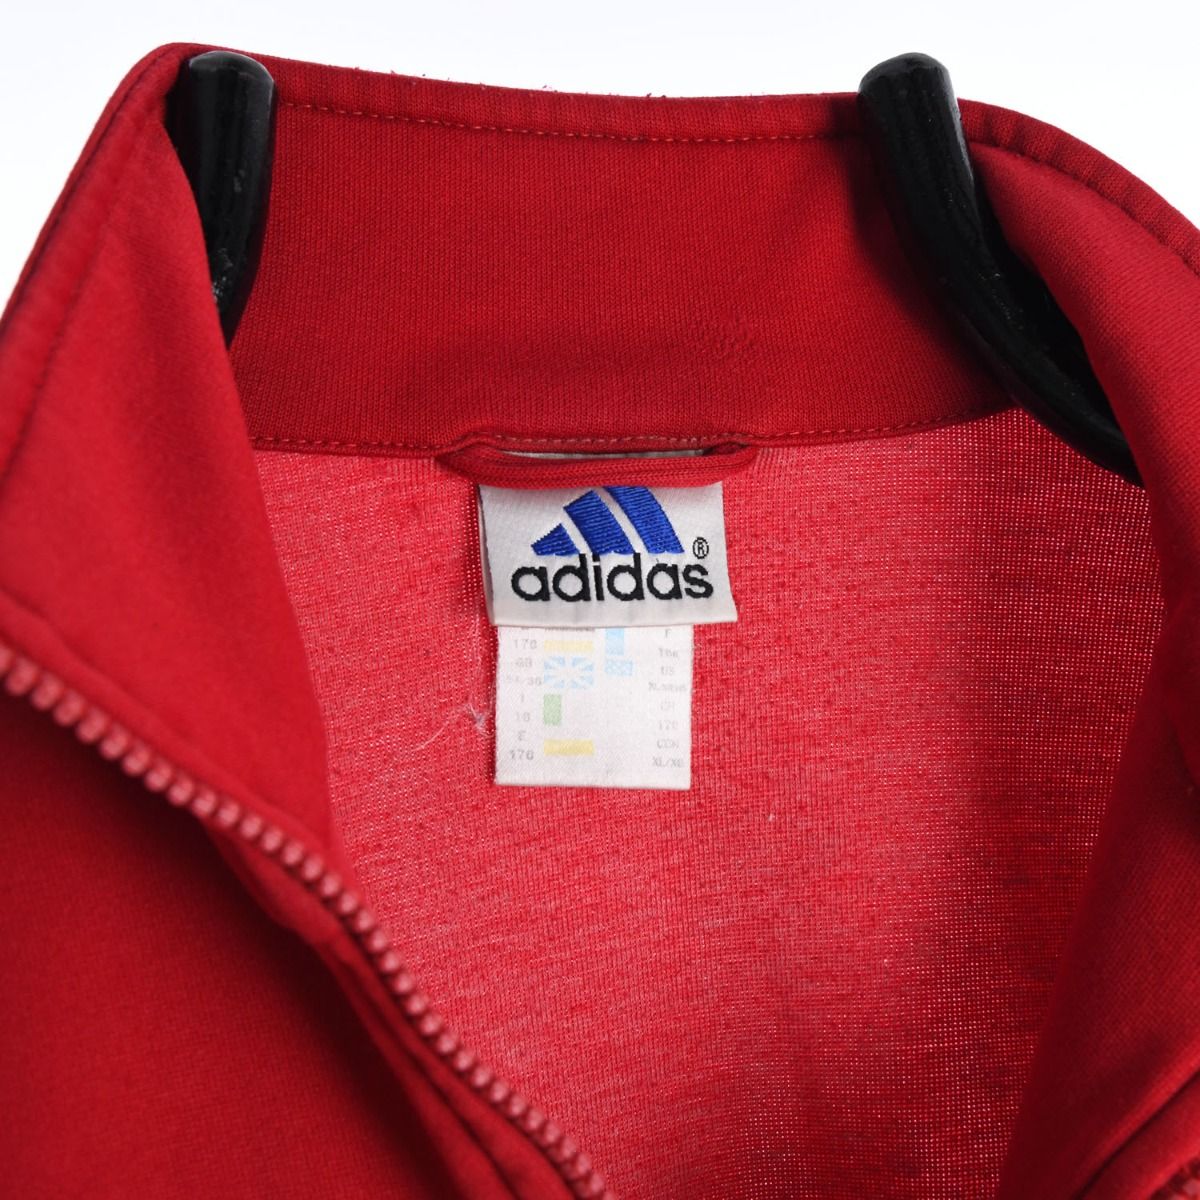 Adidas 1990s Red Track Jacket